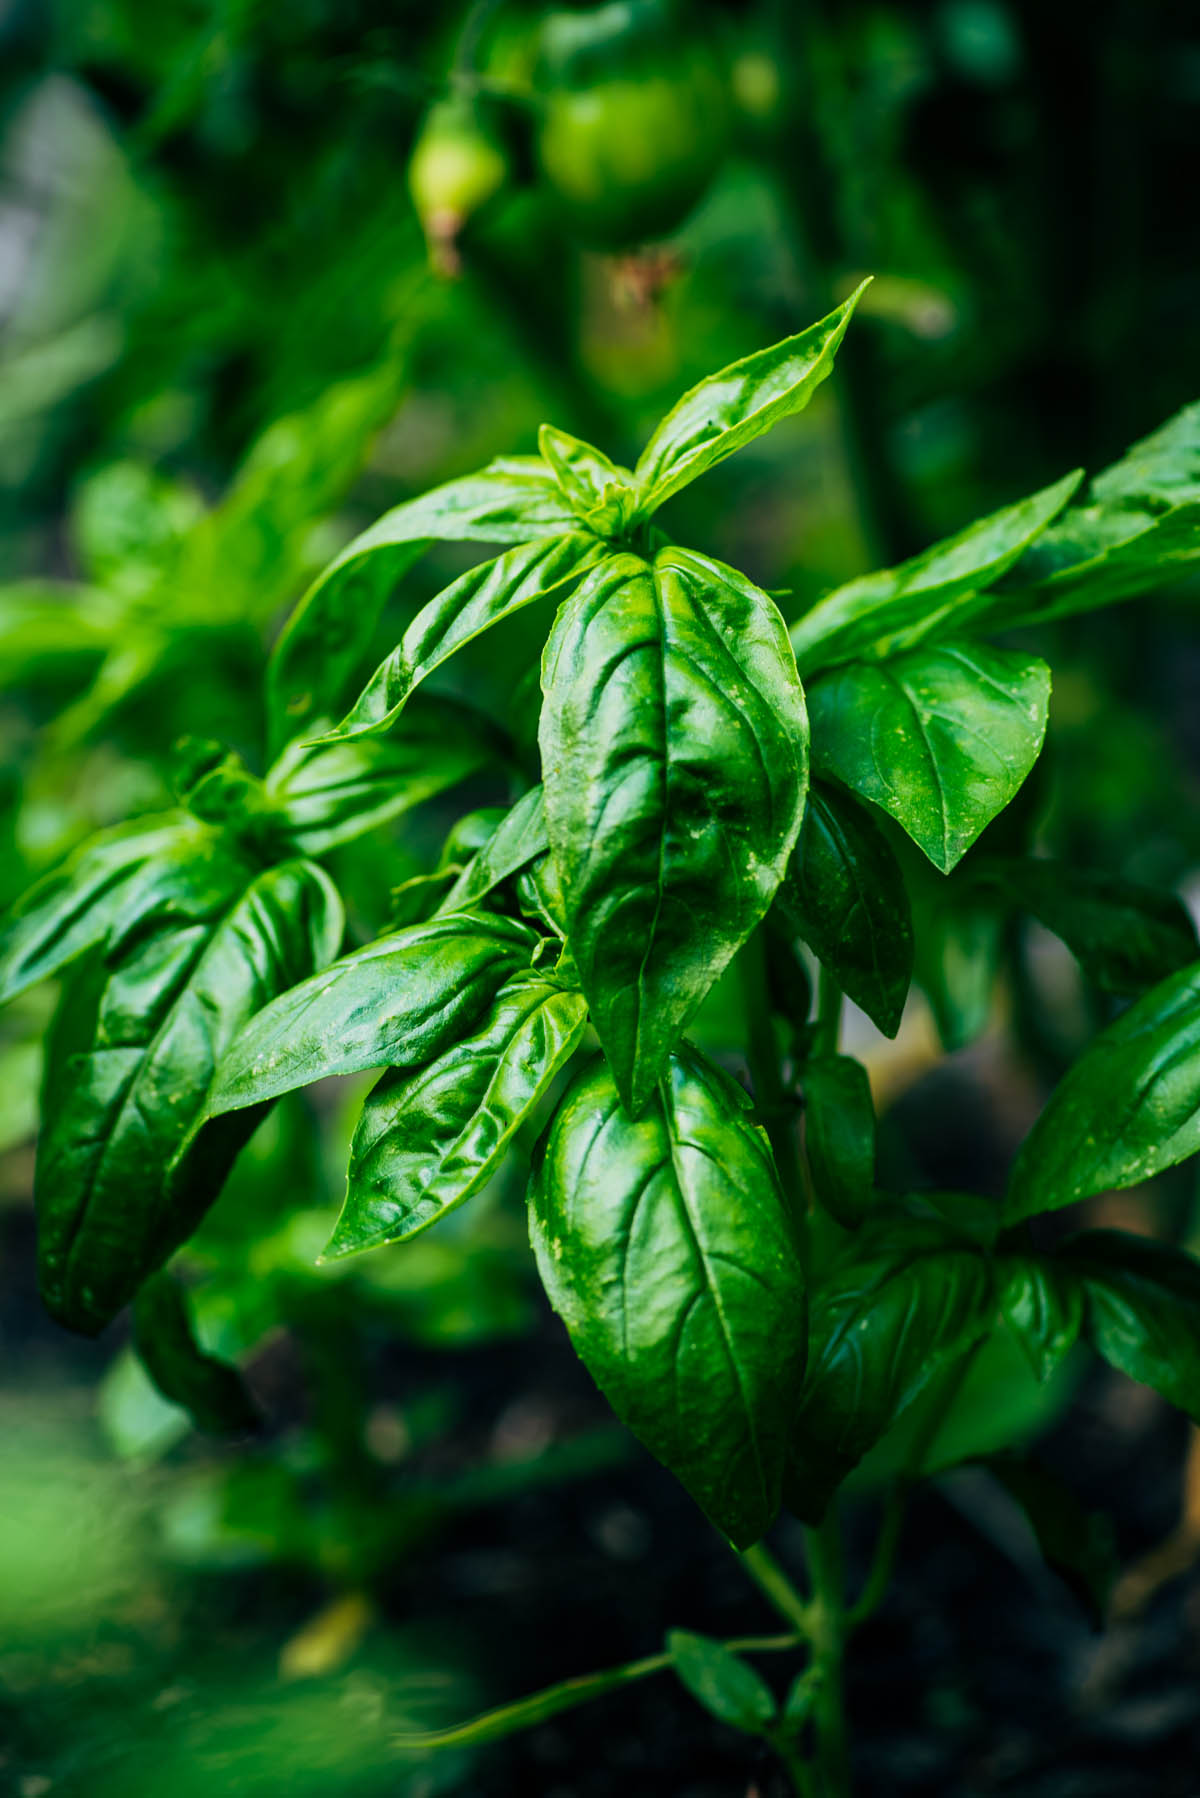 A basil plant in the garden.